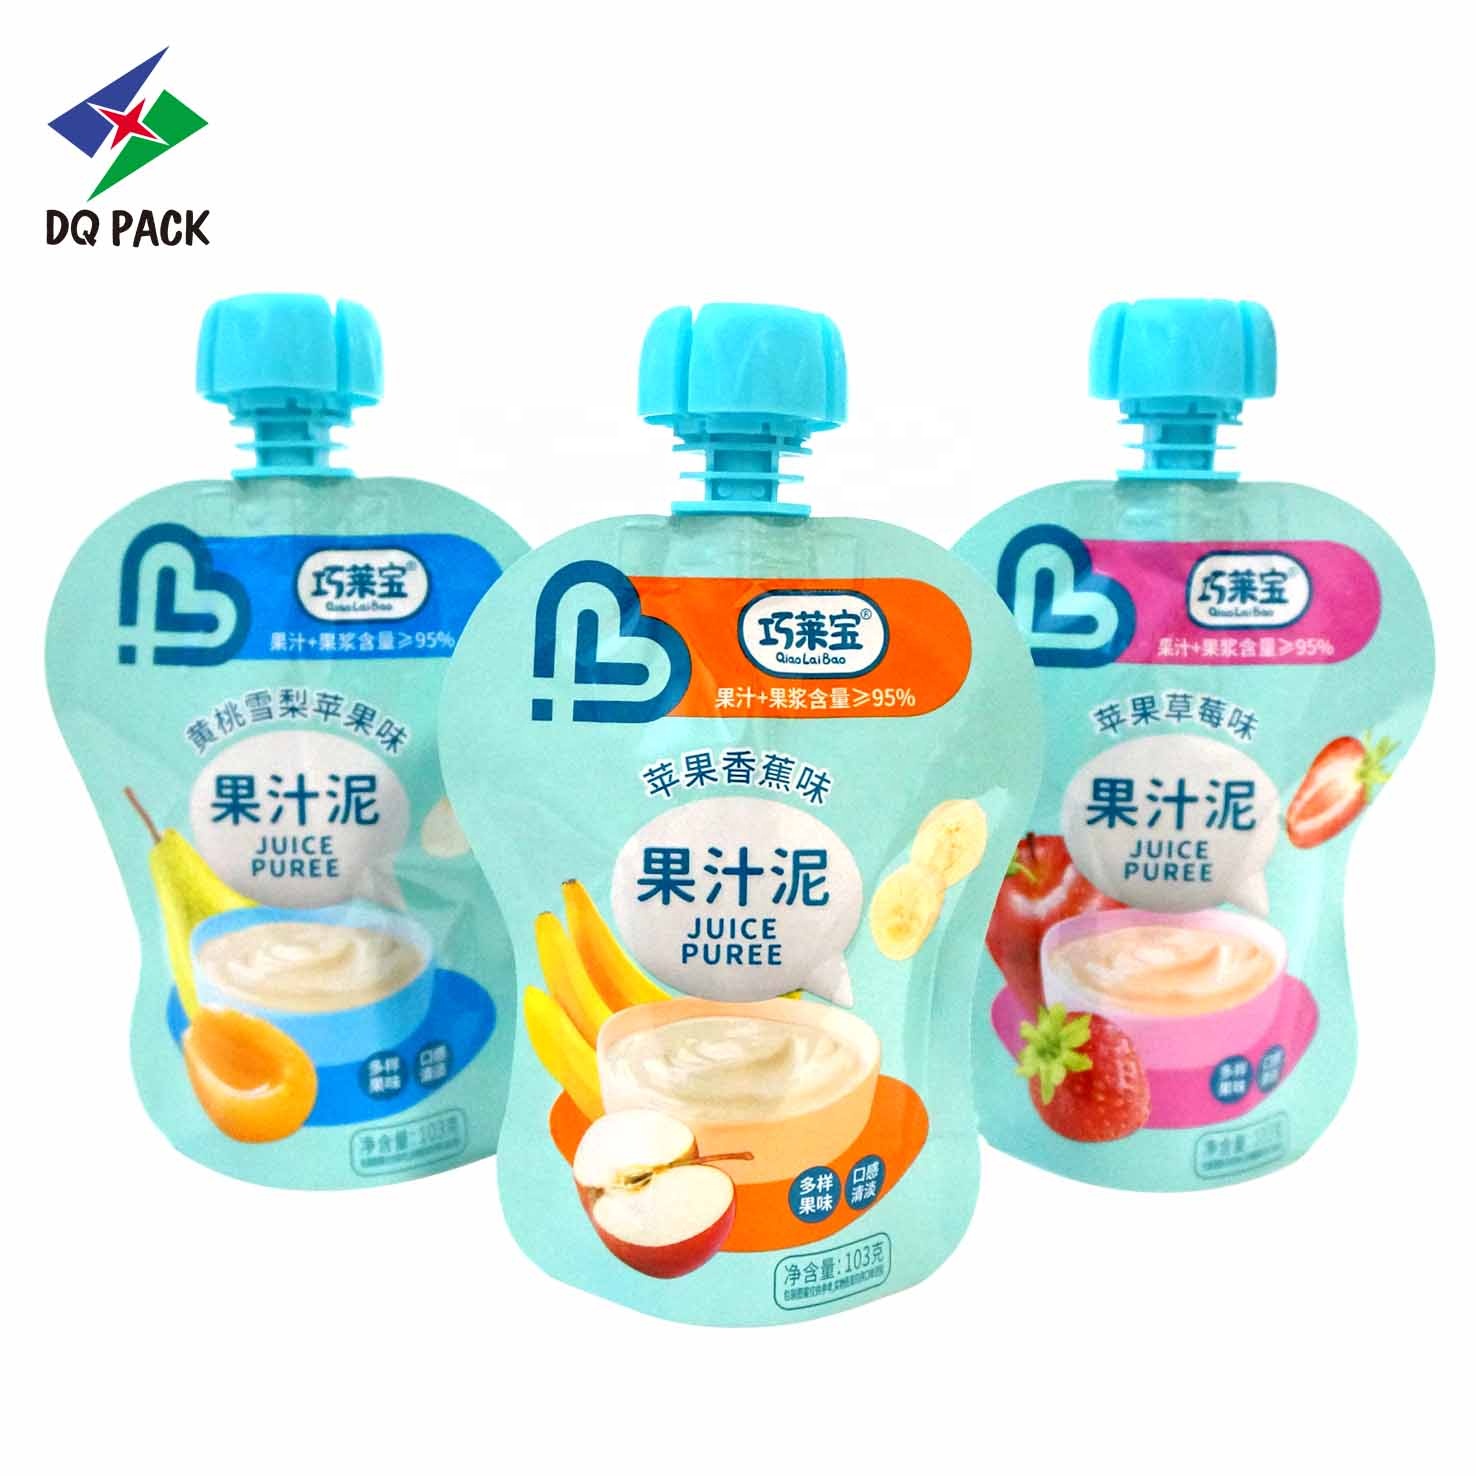 DQ PACK Hot Sale BPA Free Flexible Packaging Bag Reusable Baby Food Stand Up Spout Pouch